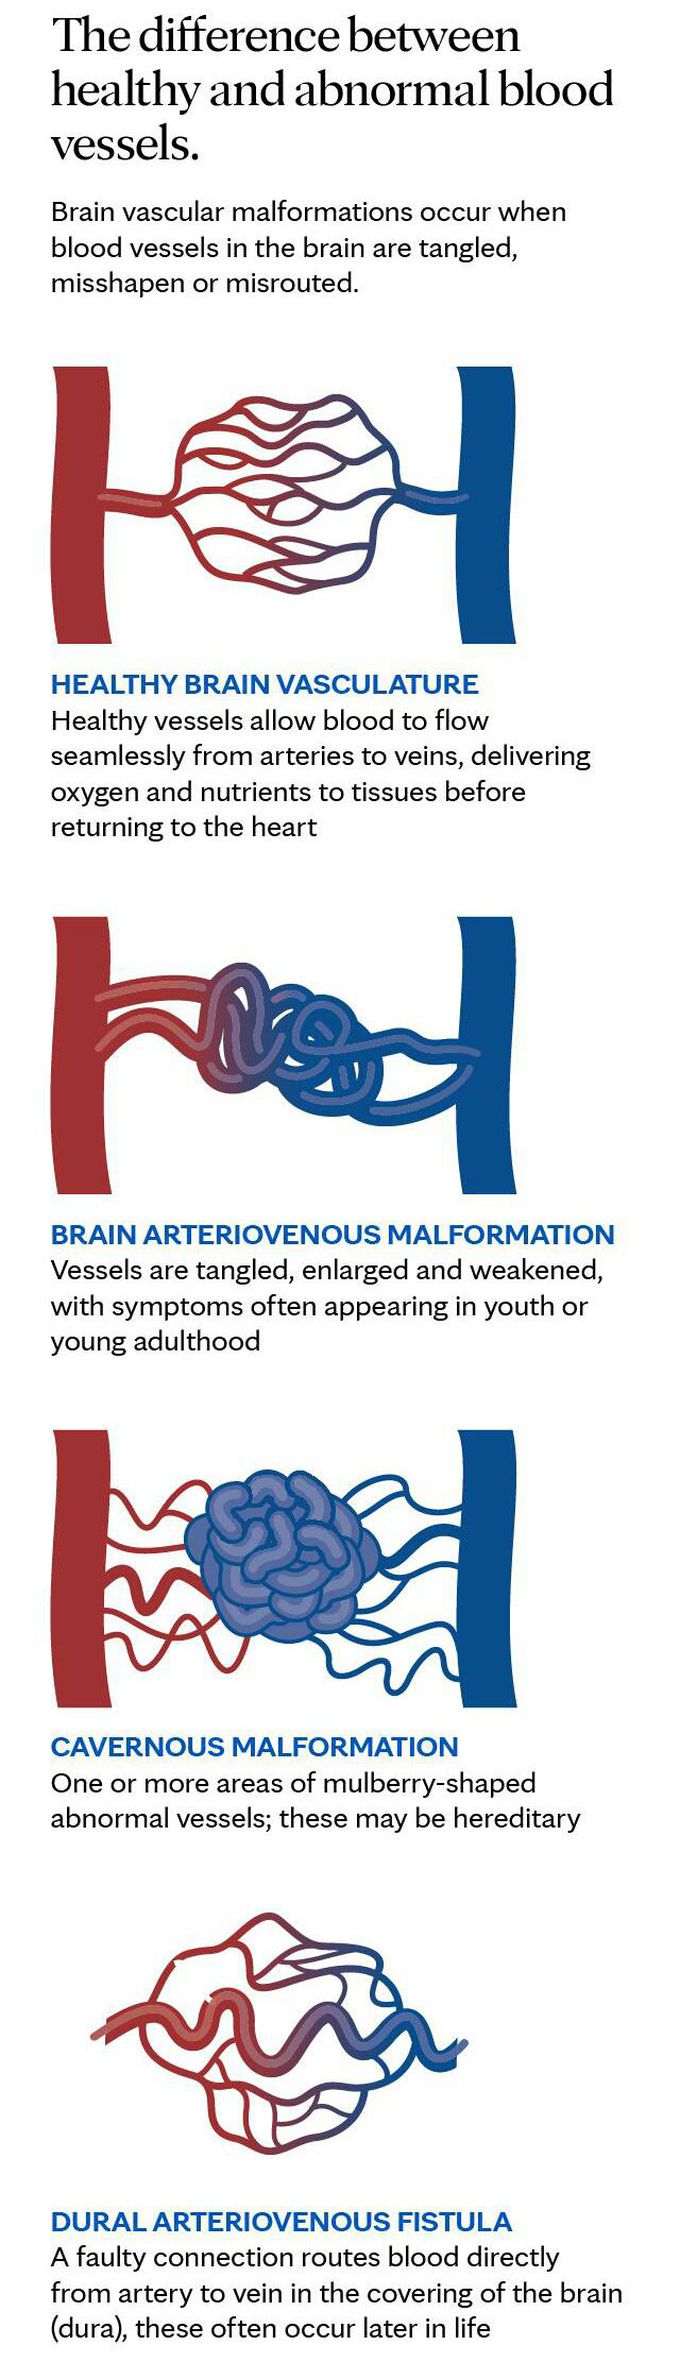 The differenec between healty and abnormal blood vessels..❤❤